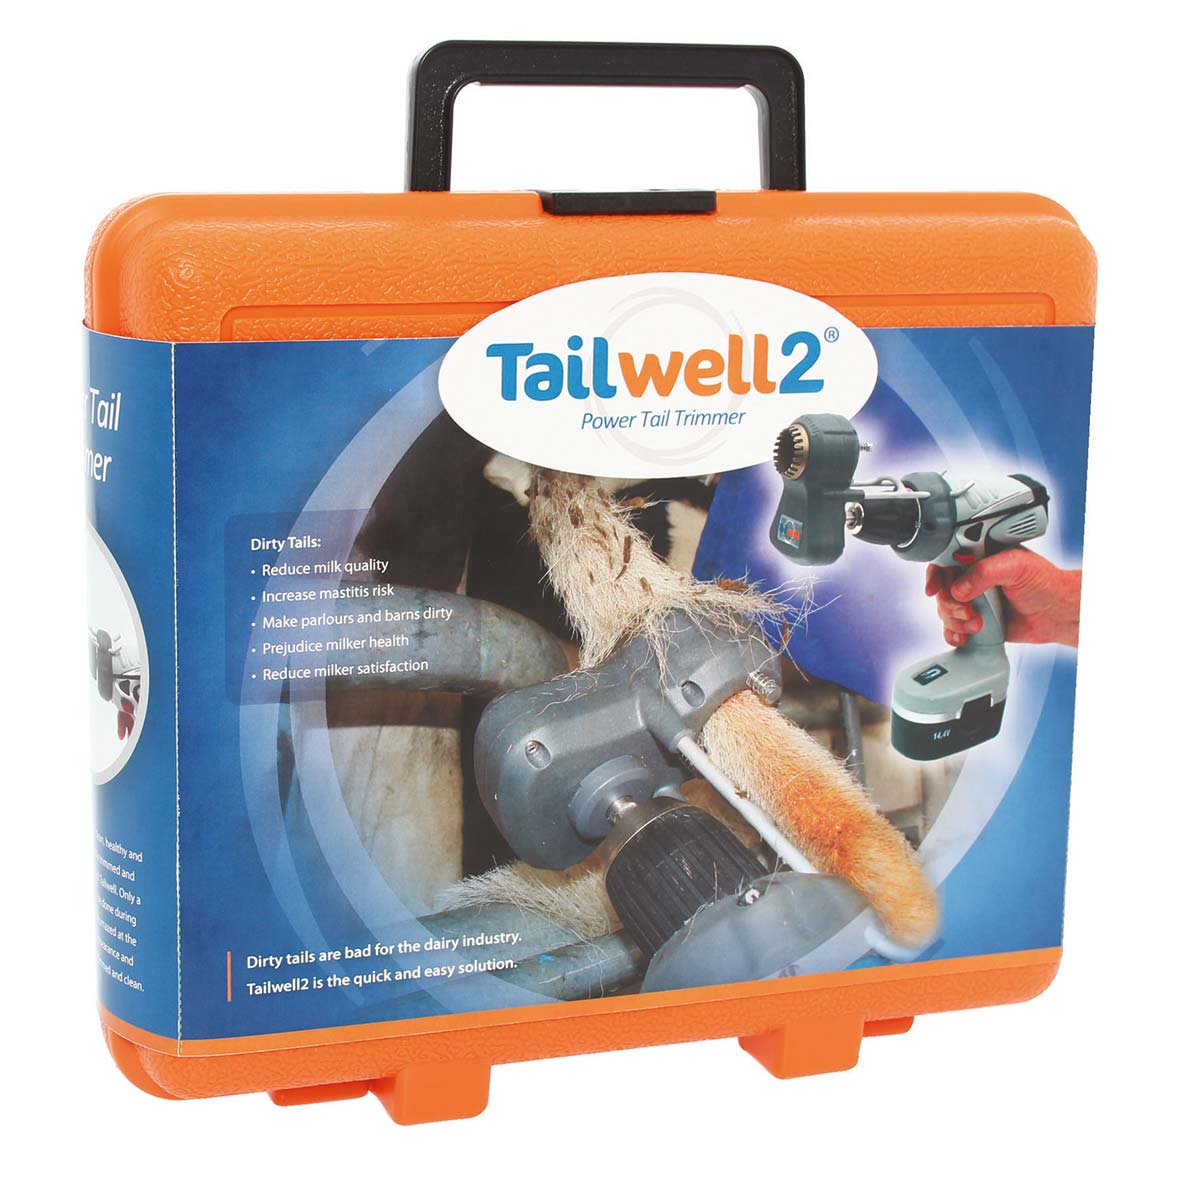 TailWell 2 Power Tail Trimmer Standard